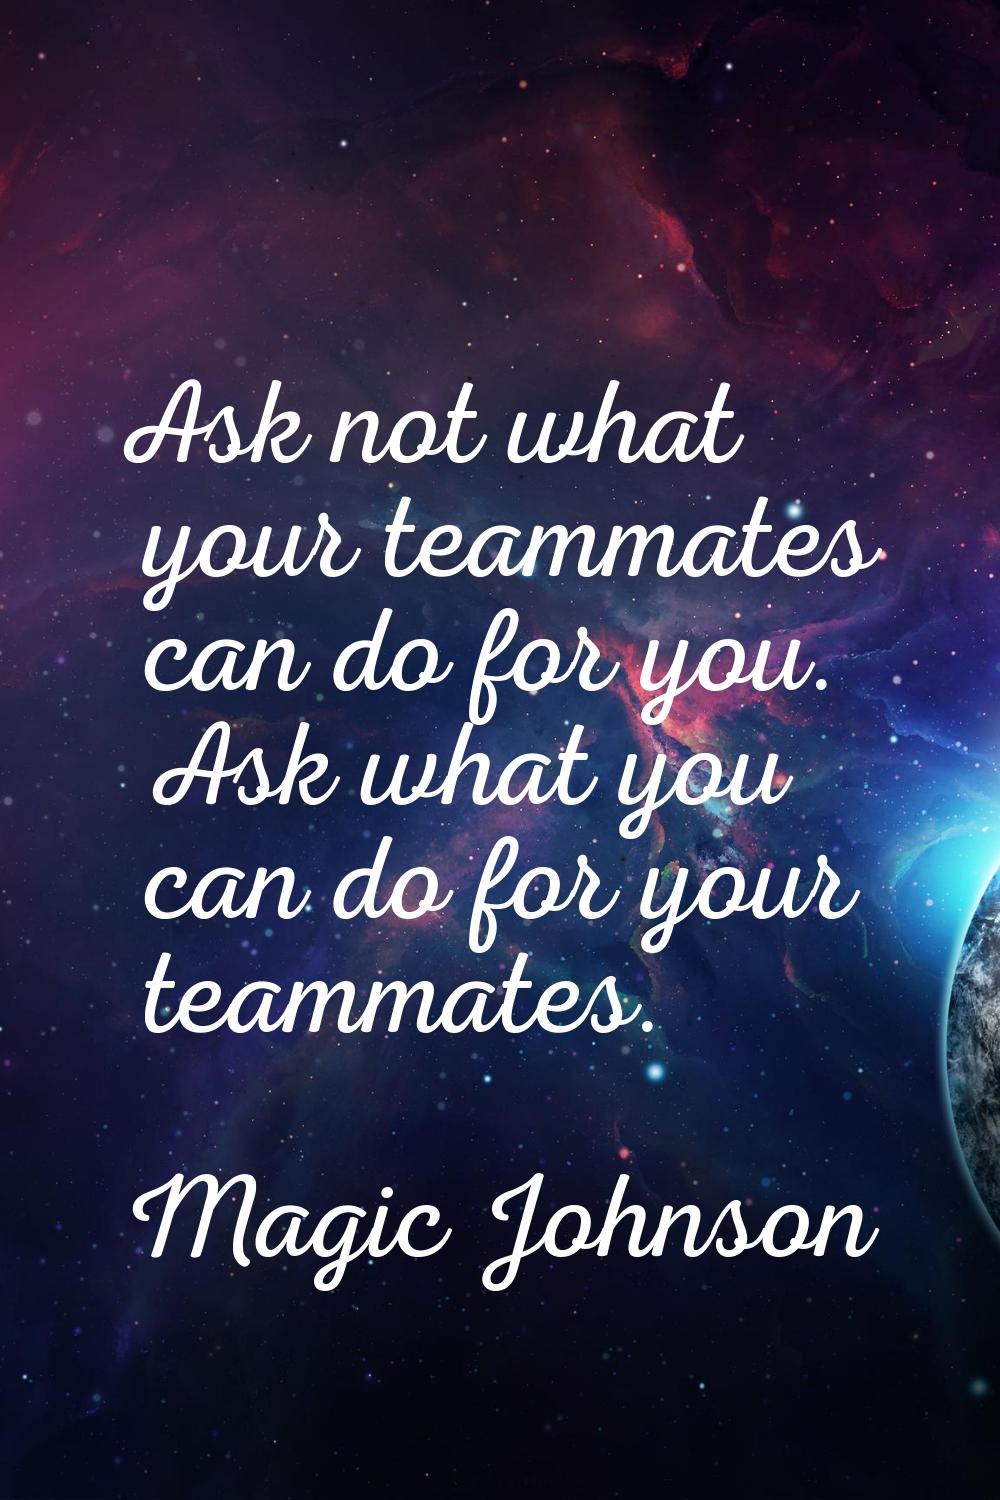 Ask not what your teammates can do for you. Ask what you can do for your teammates.